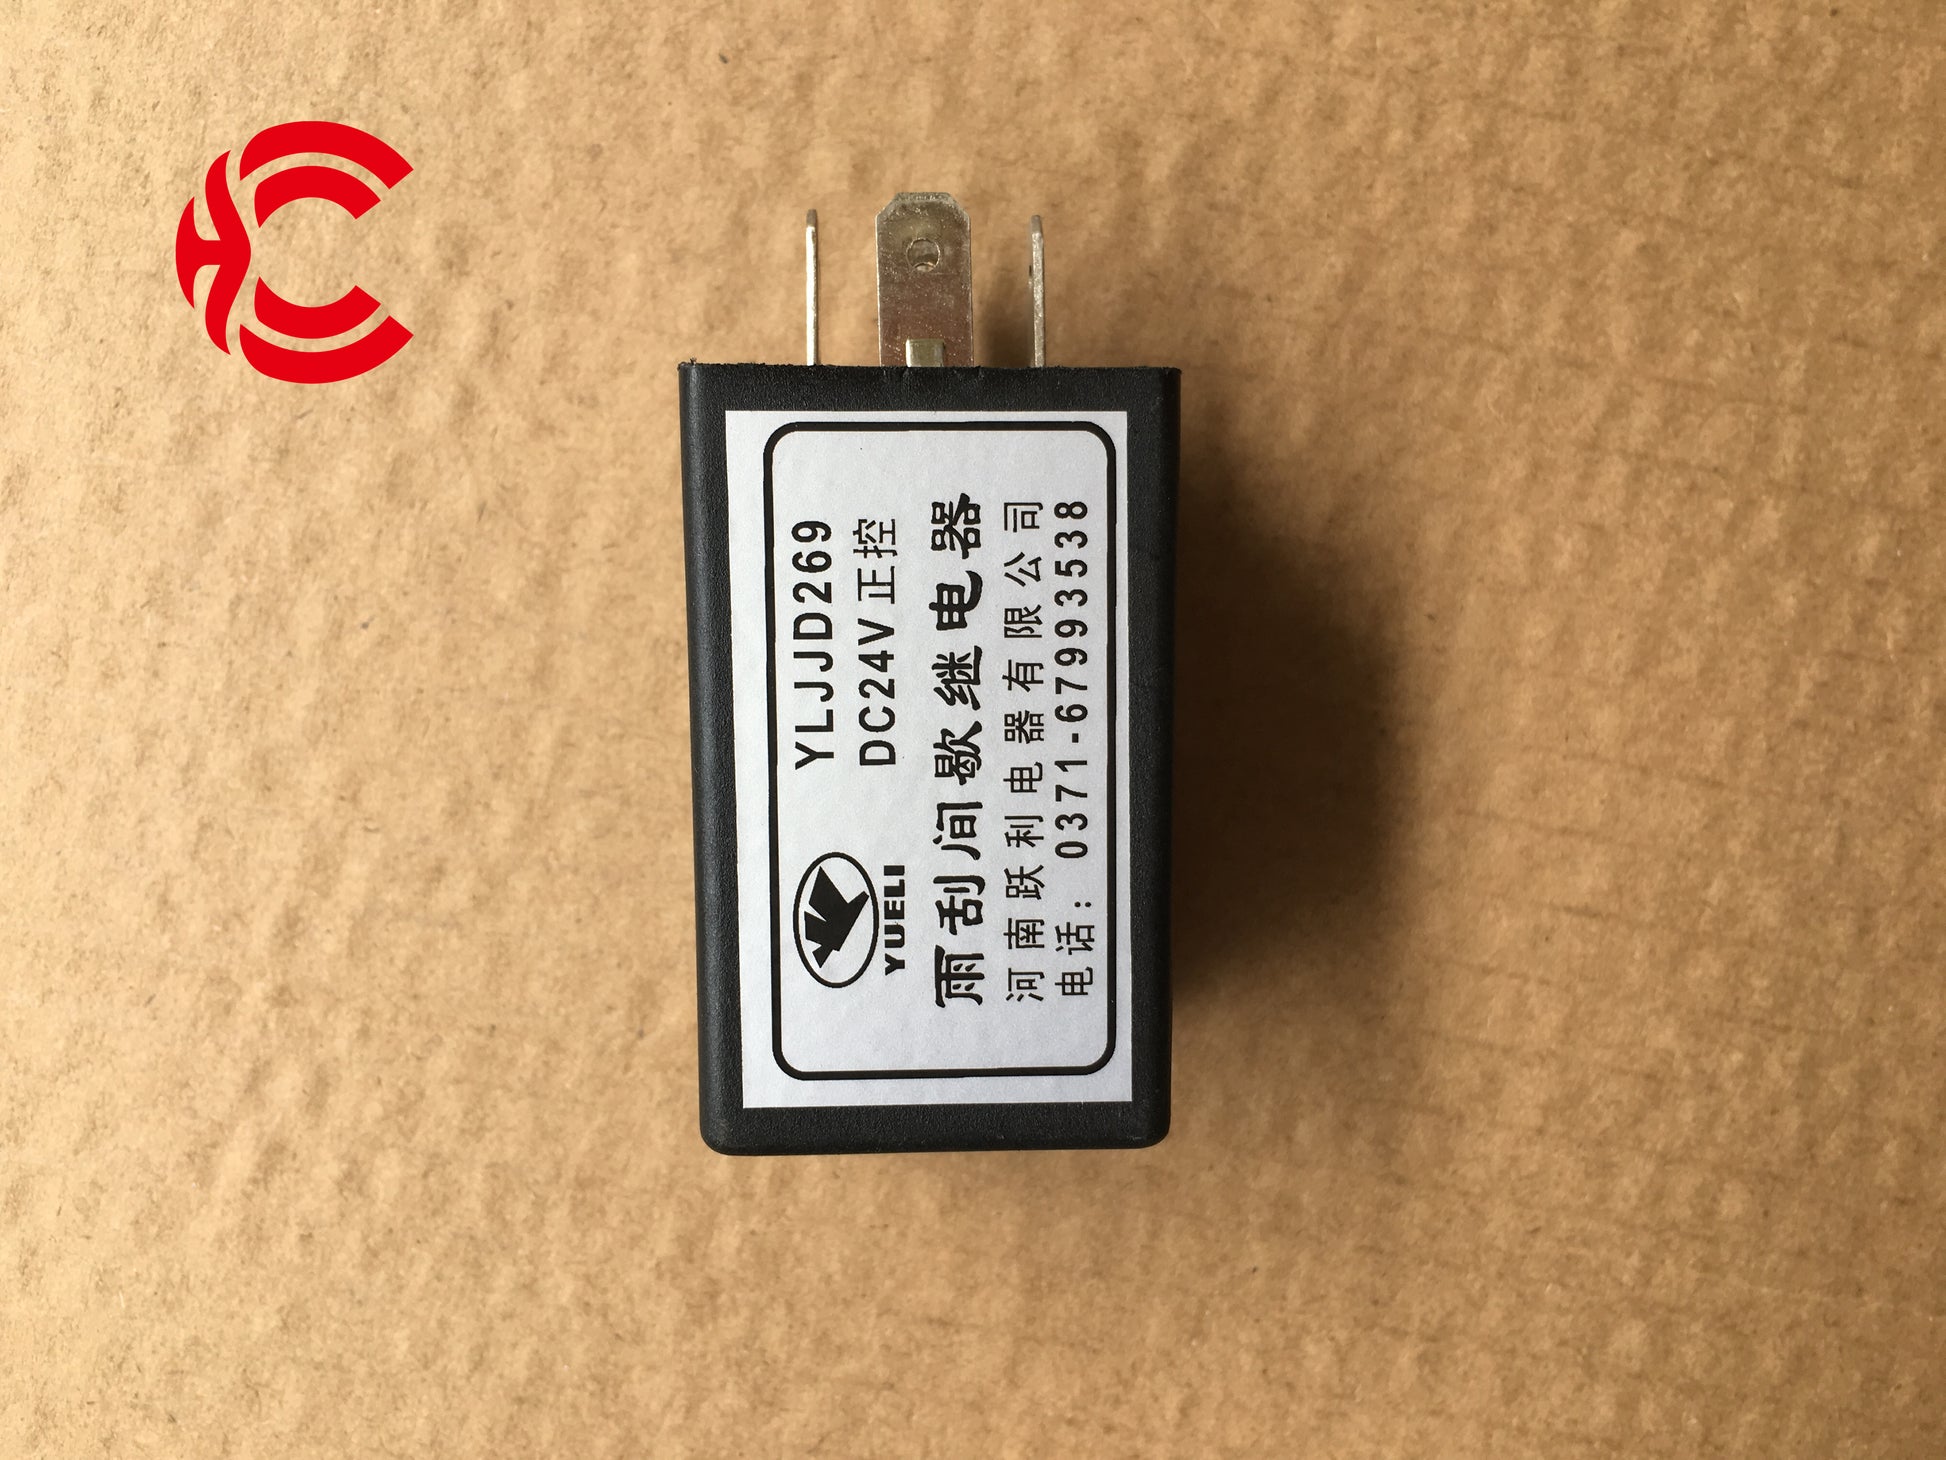 OEM: YLJJD269 Positive ControlMaterial: ABS Color: black Origin: Made in ChinaWeight: 50gPacking List: 1* Wiper Intermittent Relay More ServiceWe can provide OEM Manufacturing serviceWe can Be your one-step solution for Auto PartsWe can provide technical scheme for you Feel Free to Contact Us, We will get back to you as soon as possible.